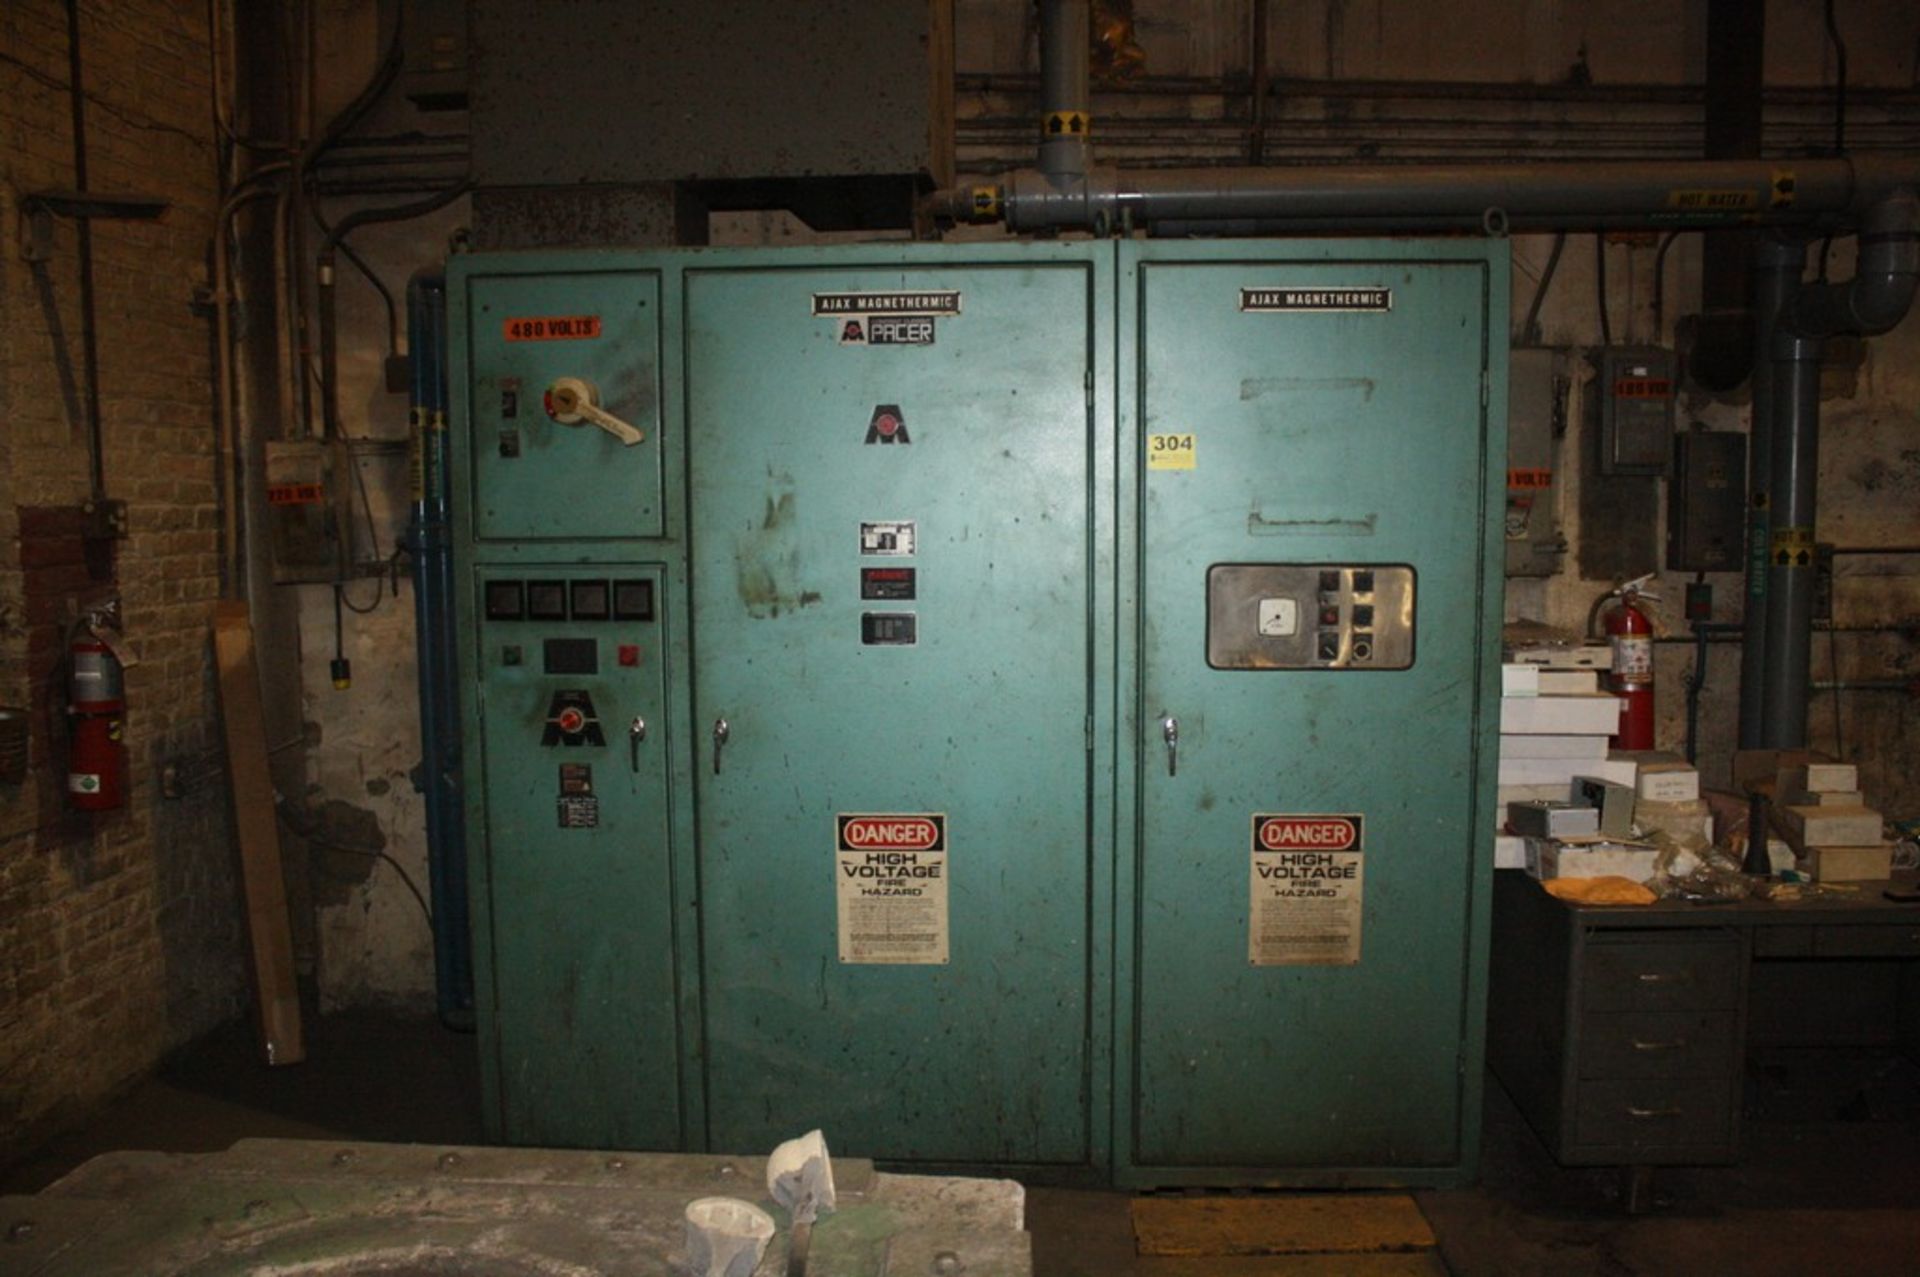 AJAX MAGNETHERMIC 500 KW 1 KHZ PACER INTEGRAL FIBEROPTIC POWER SUPPLY S/N M-97630-C W/1-TON AND 1/ - Image 2 of 6